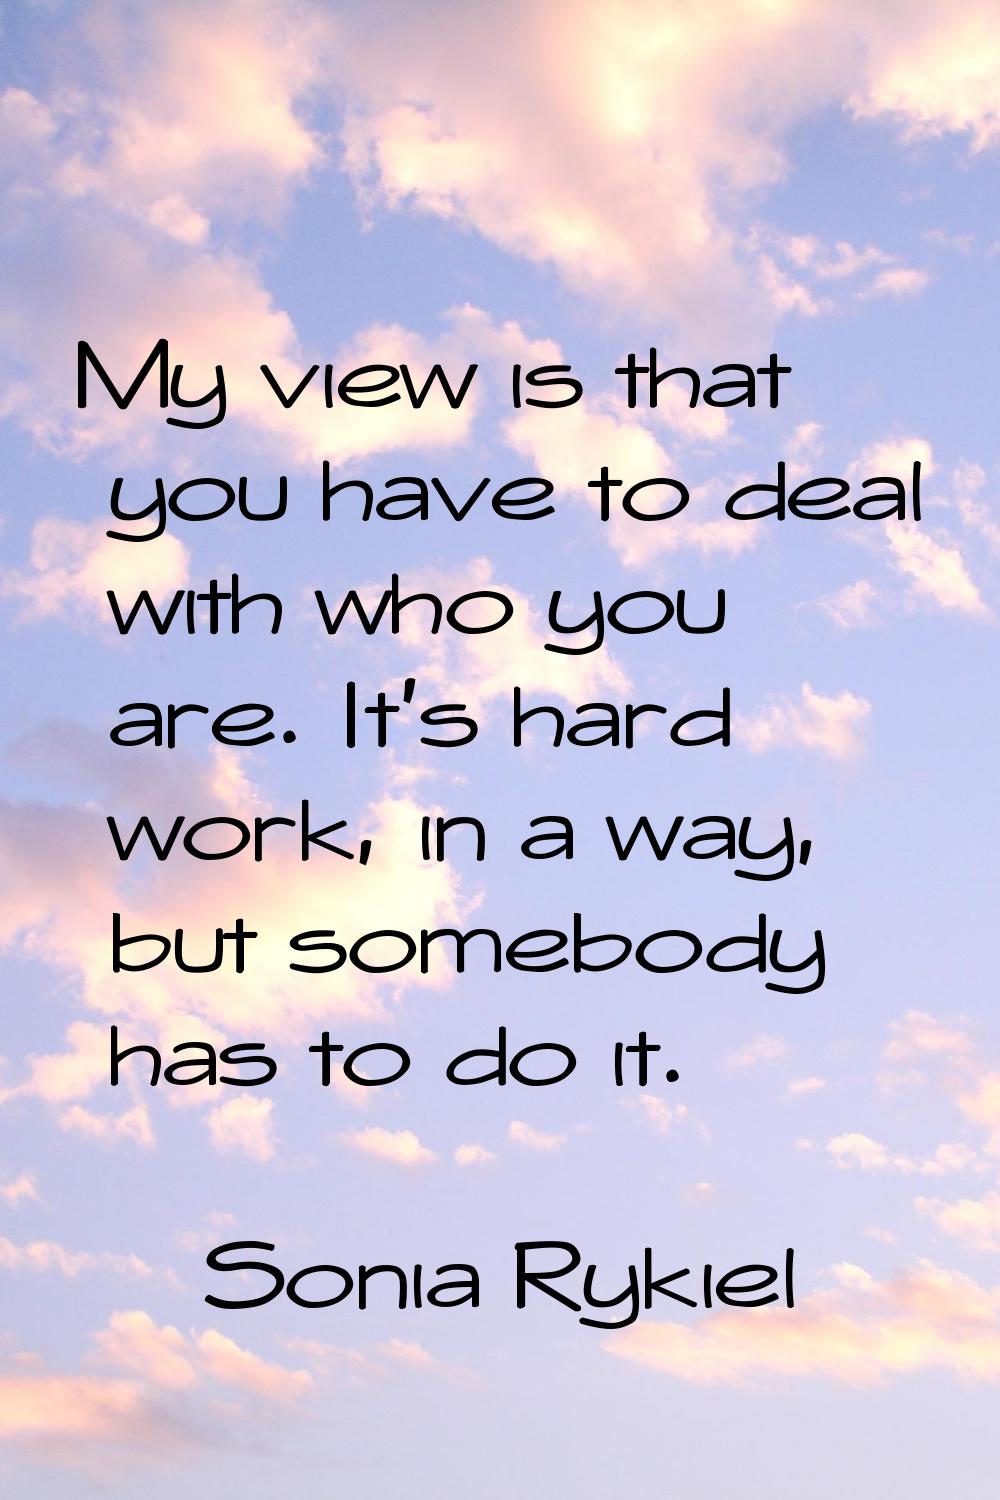 My view is that you have to deal with who you are. It's hard work, in a way, but somebody has to do